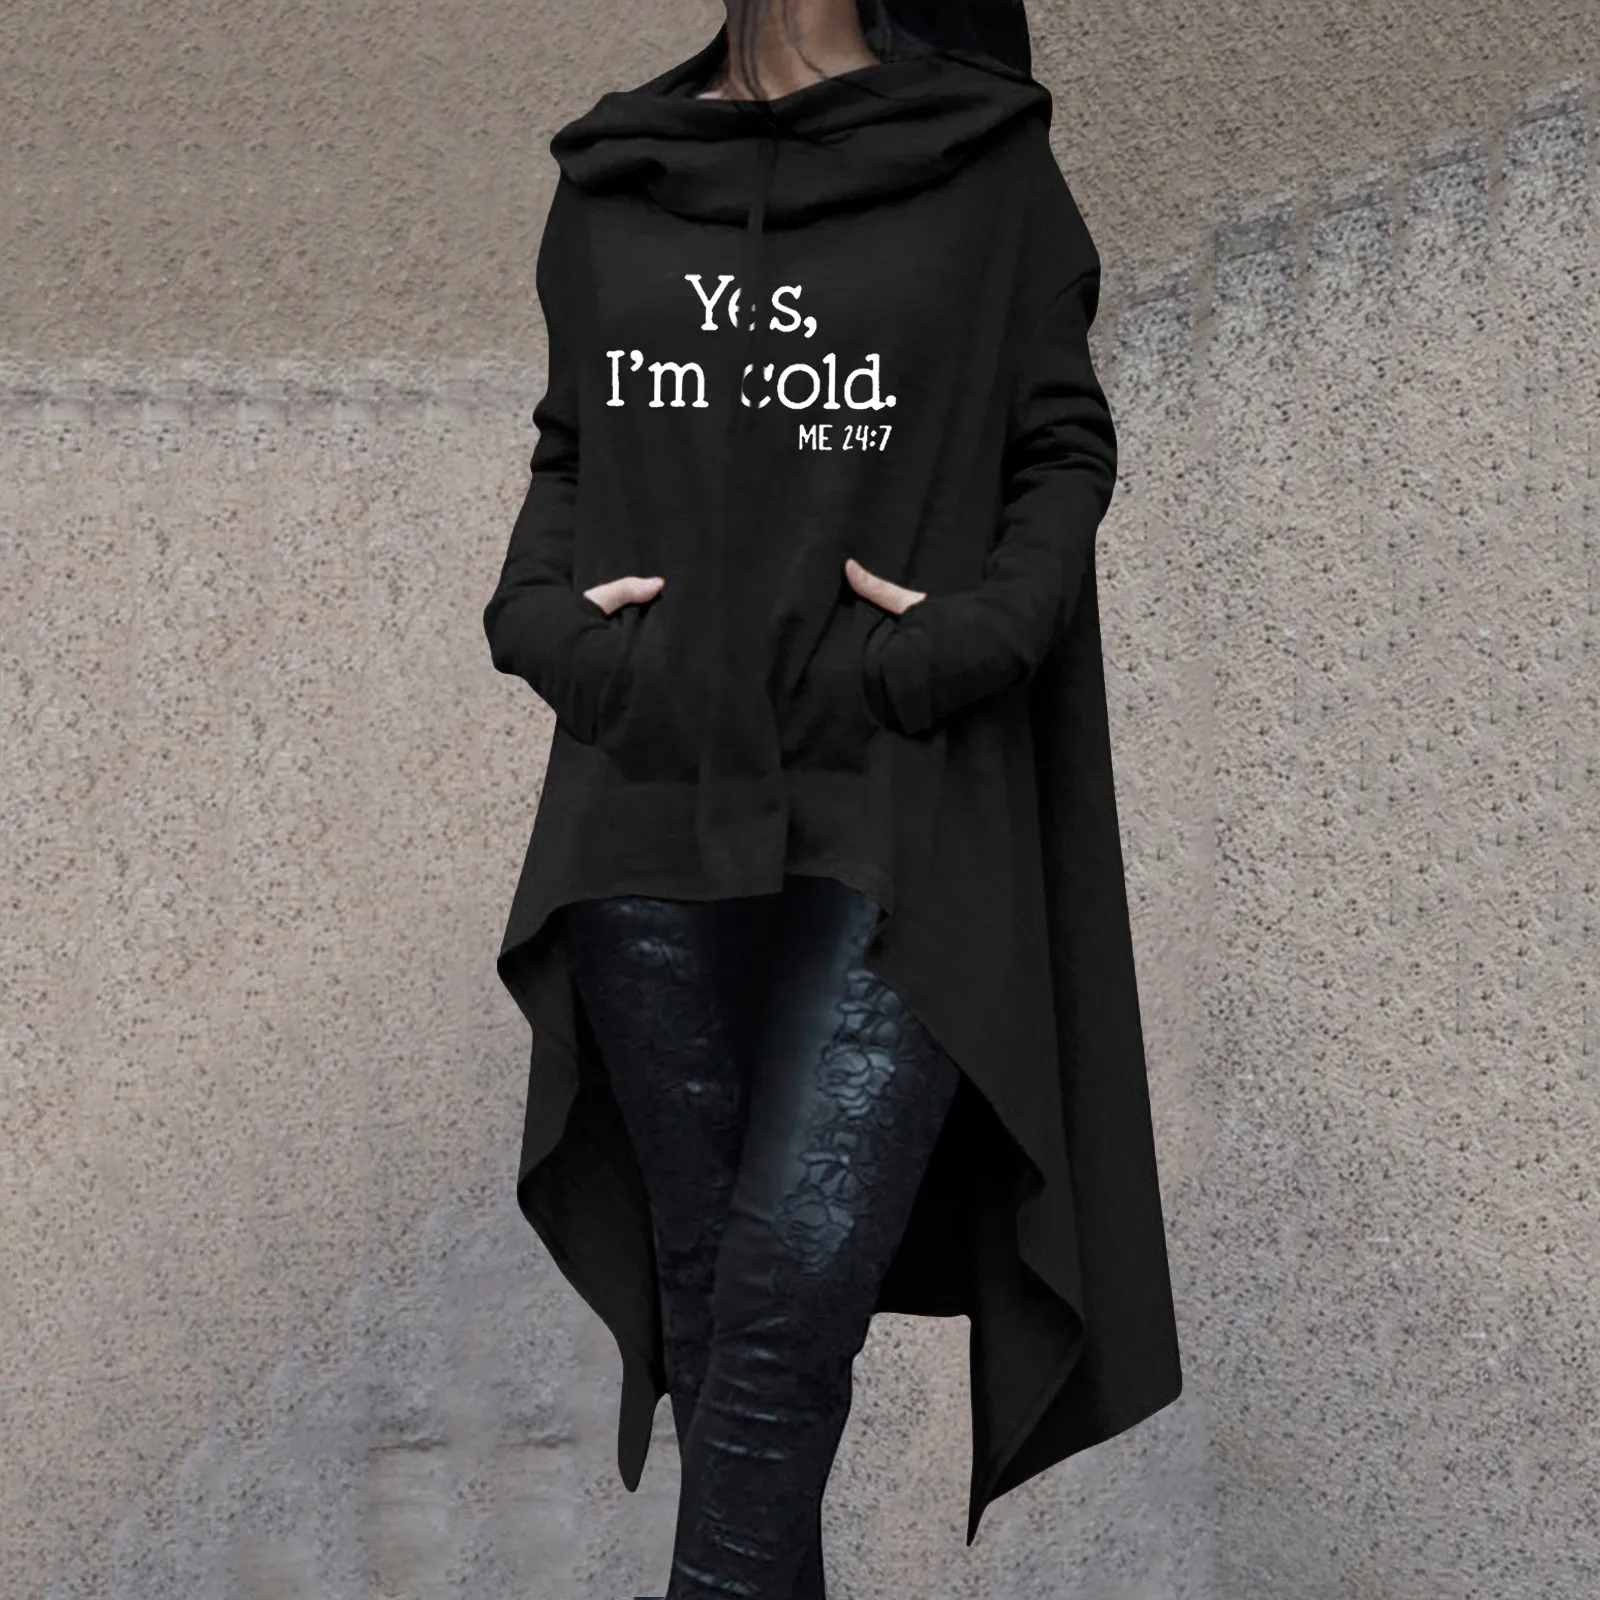 Women Hoodies Long Irregular Yes I'm Cold Letter Tops Femmes Sweatshirts Pattern Funny Cotton Cropped Oversize Hoodies Dress